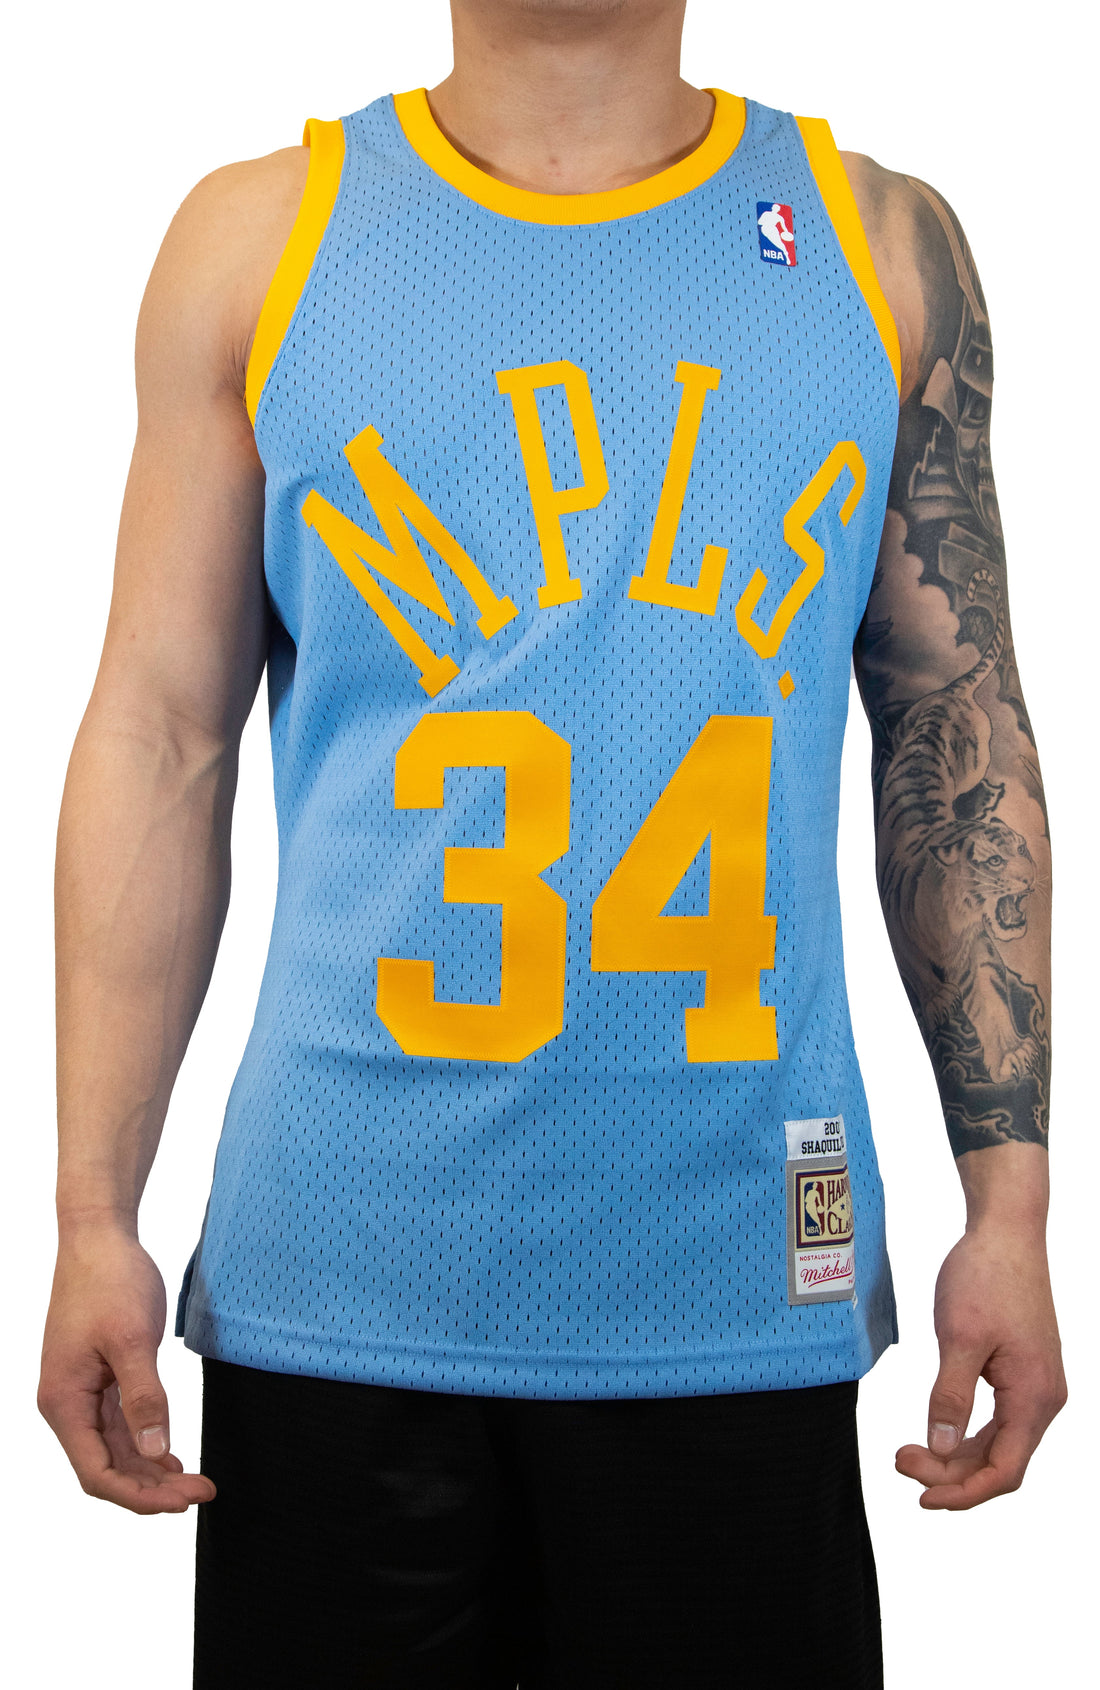 Mitchell & Ness: Hardwood Classic Los Angeles Lakers Jersey (Shaquille O'Neal)